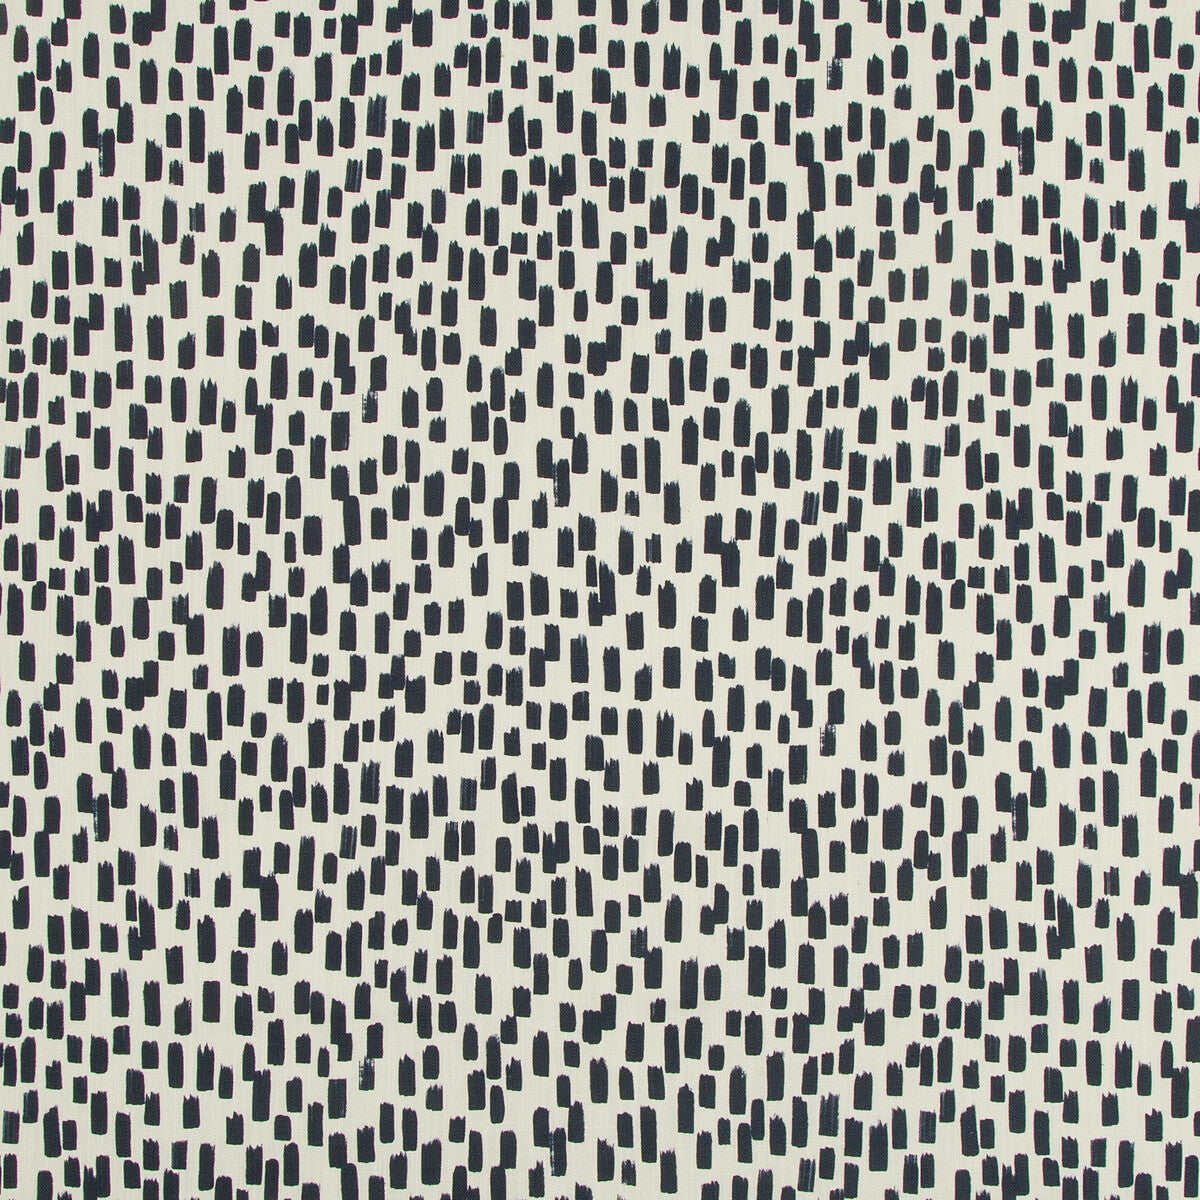 Inkstrokes fabric in admiral color - pattern INKSTROKES.50.0 - by Kravet Basics in the Nate Berkus Well-Traveled collection